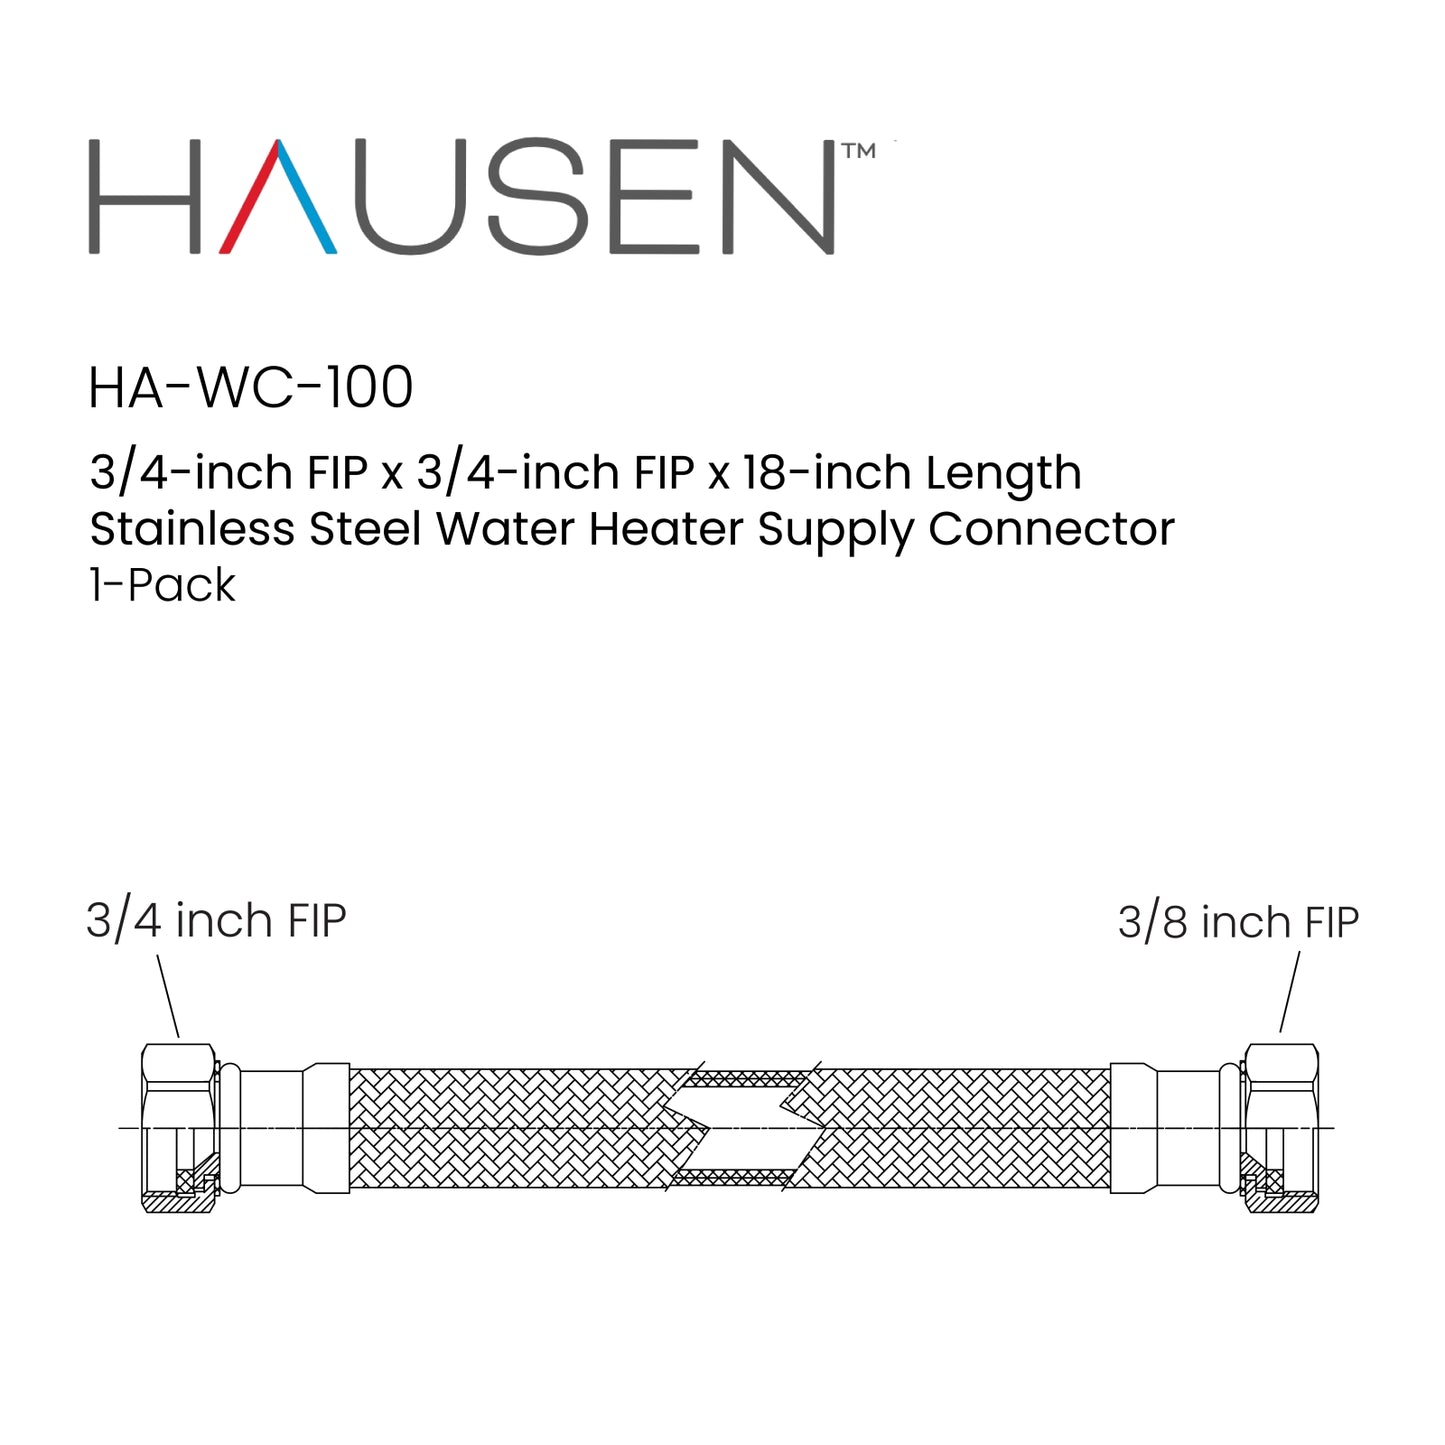 Hausen 3/4-inch FIP (Female Iron Pipe) x 3/4-inch FIP (Female Iron Pipe) x 18-inch Length Stainless Steel Water Heater Supply Connector; Lead Free; For Hydronic Heating Applications, 1-Pack